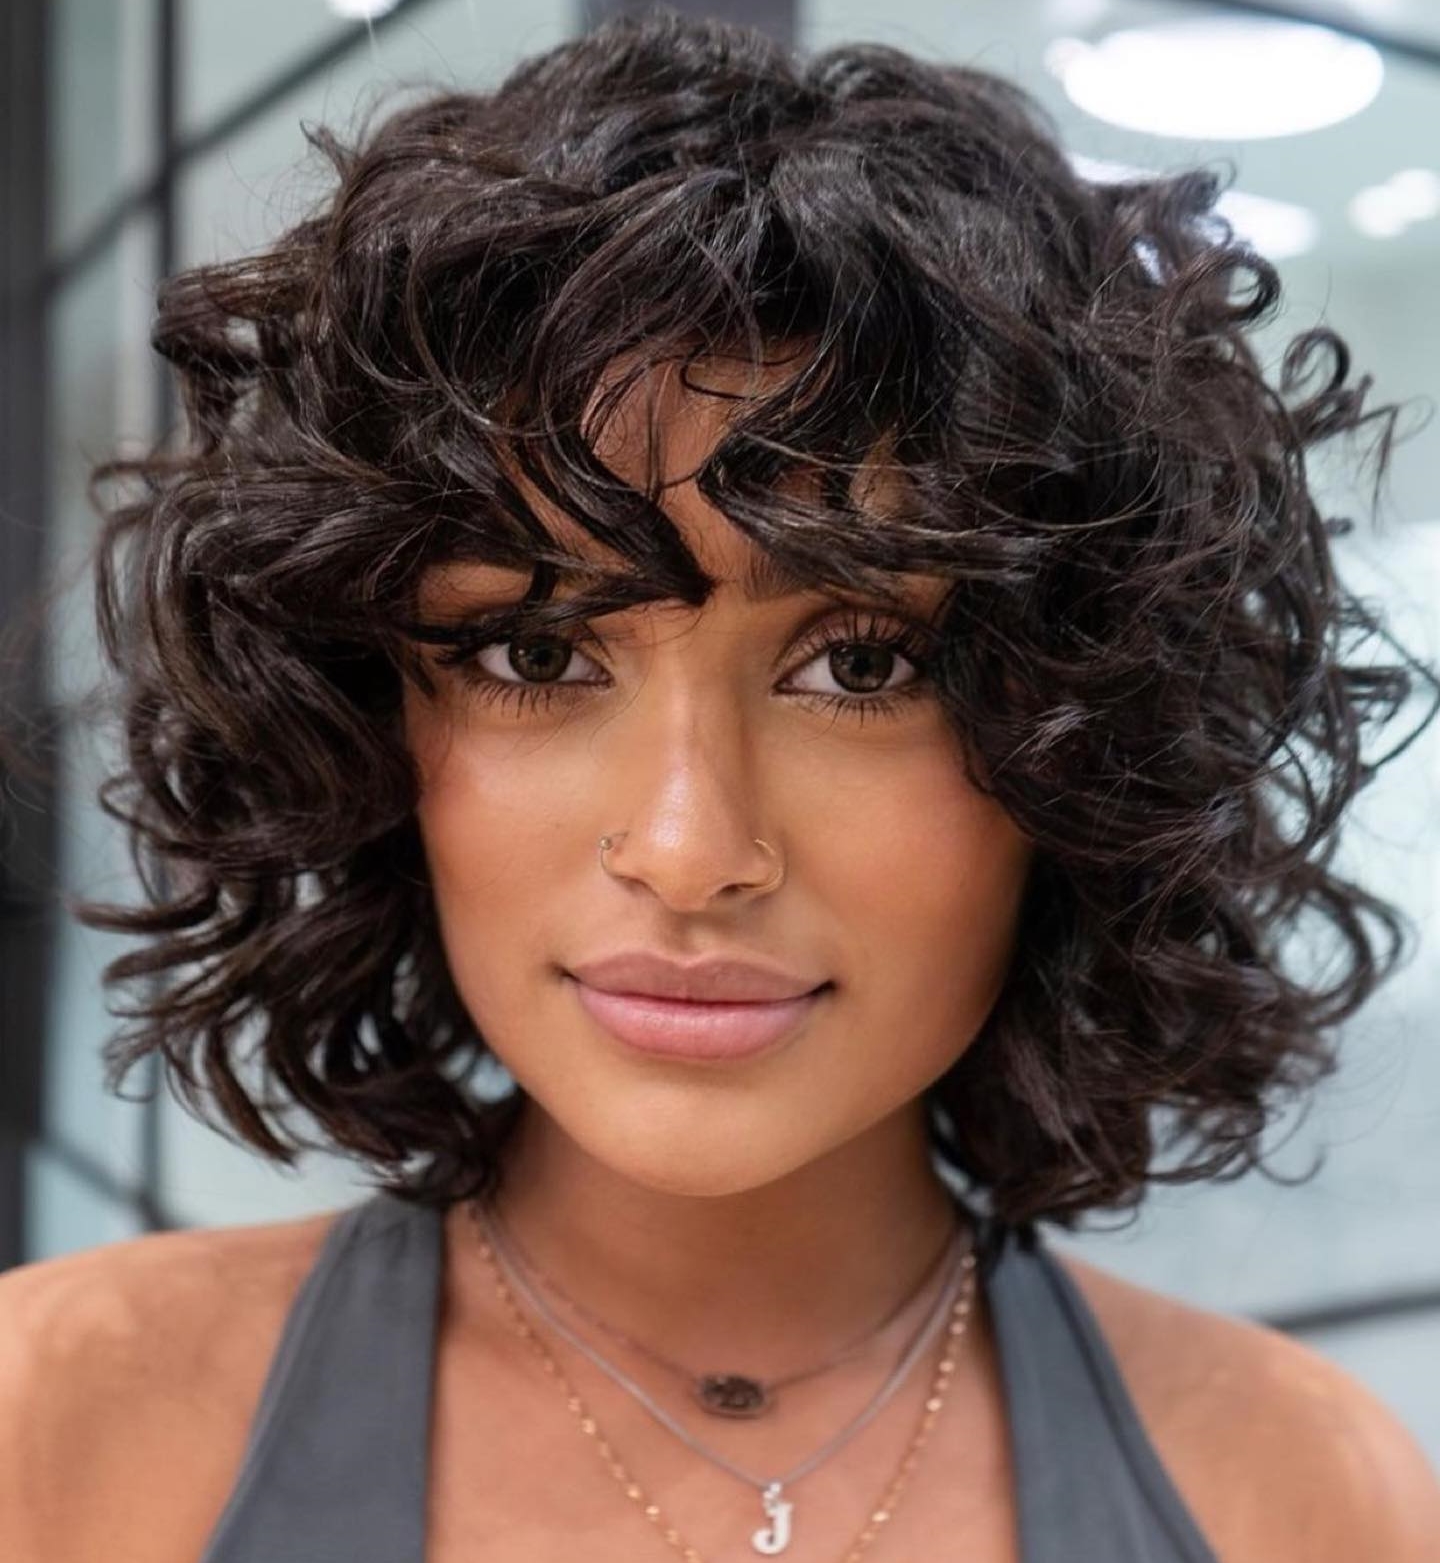 66 Stunning Curly Bob Hairstyles: Shoulder Length to Chin Length - Hood MWR